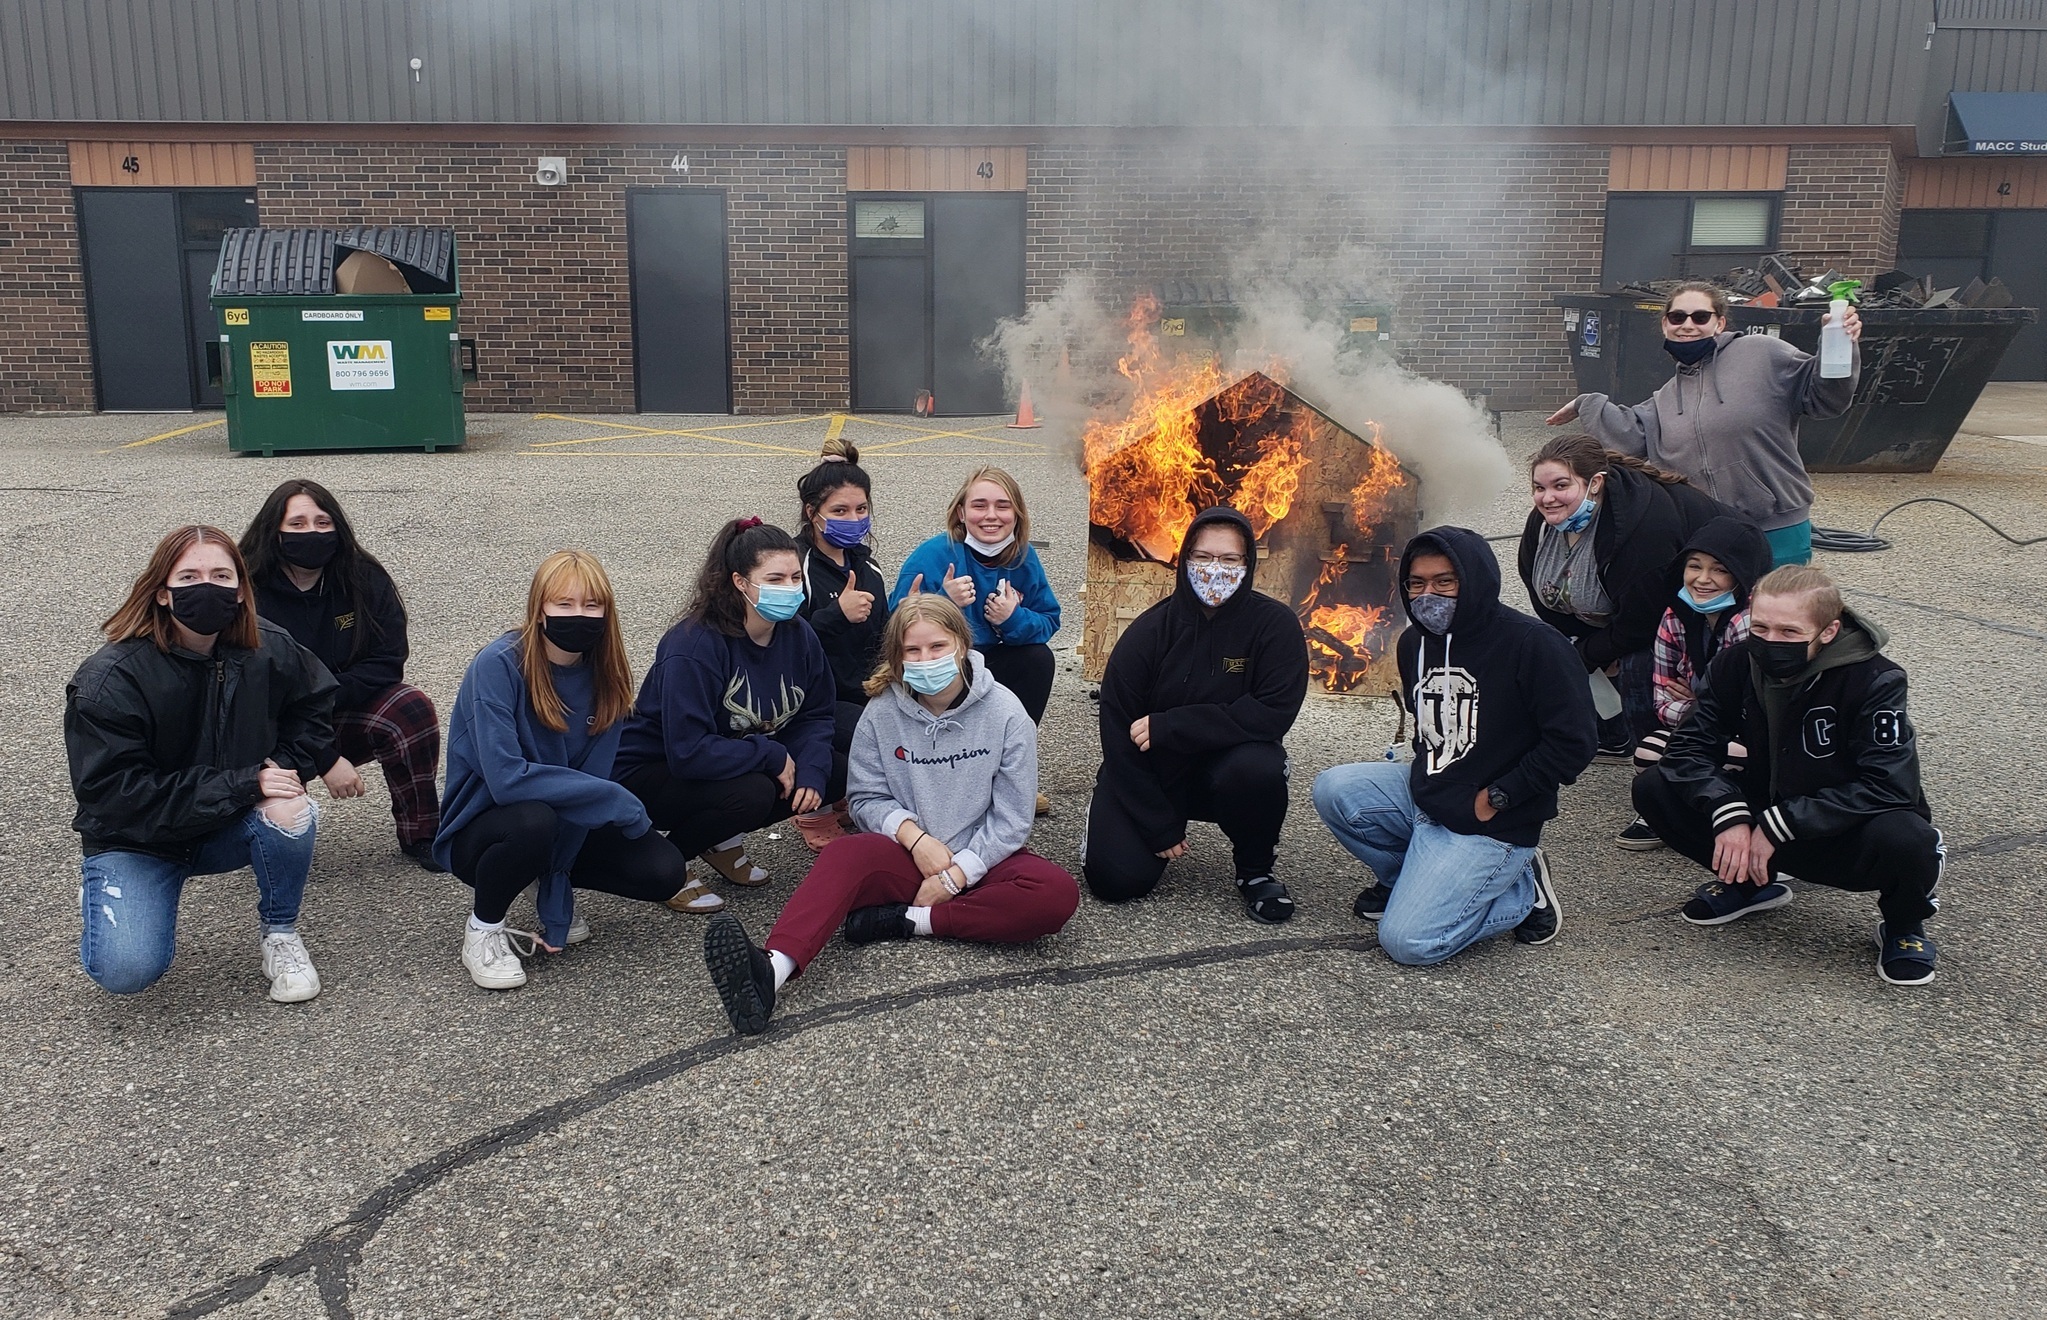 Public safety students burning a model to investigate fire science.